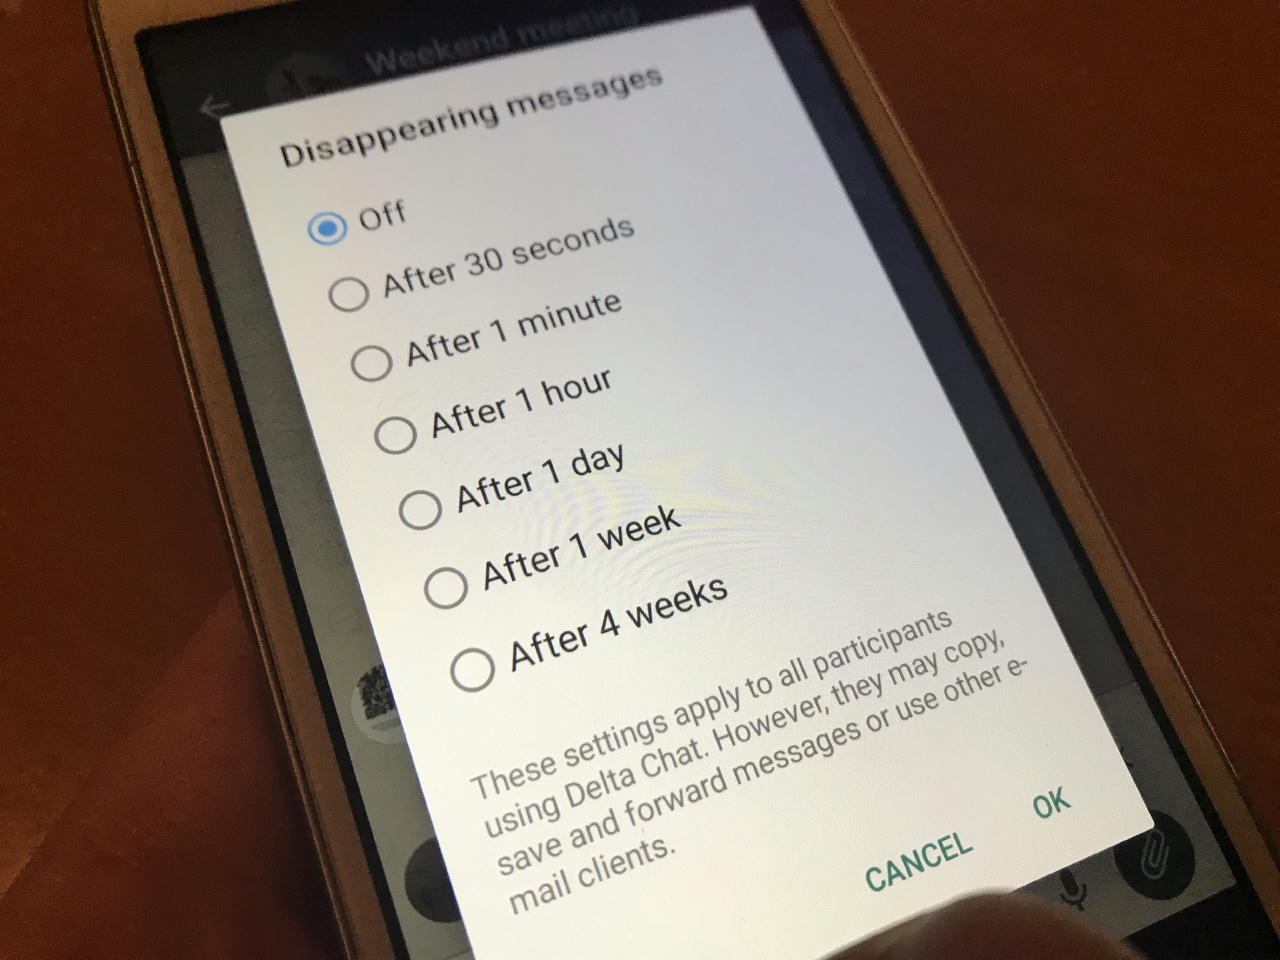 Phone screen showing alternatives for how long messages should be retained.